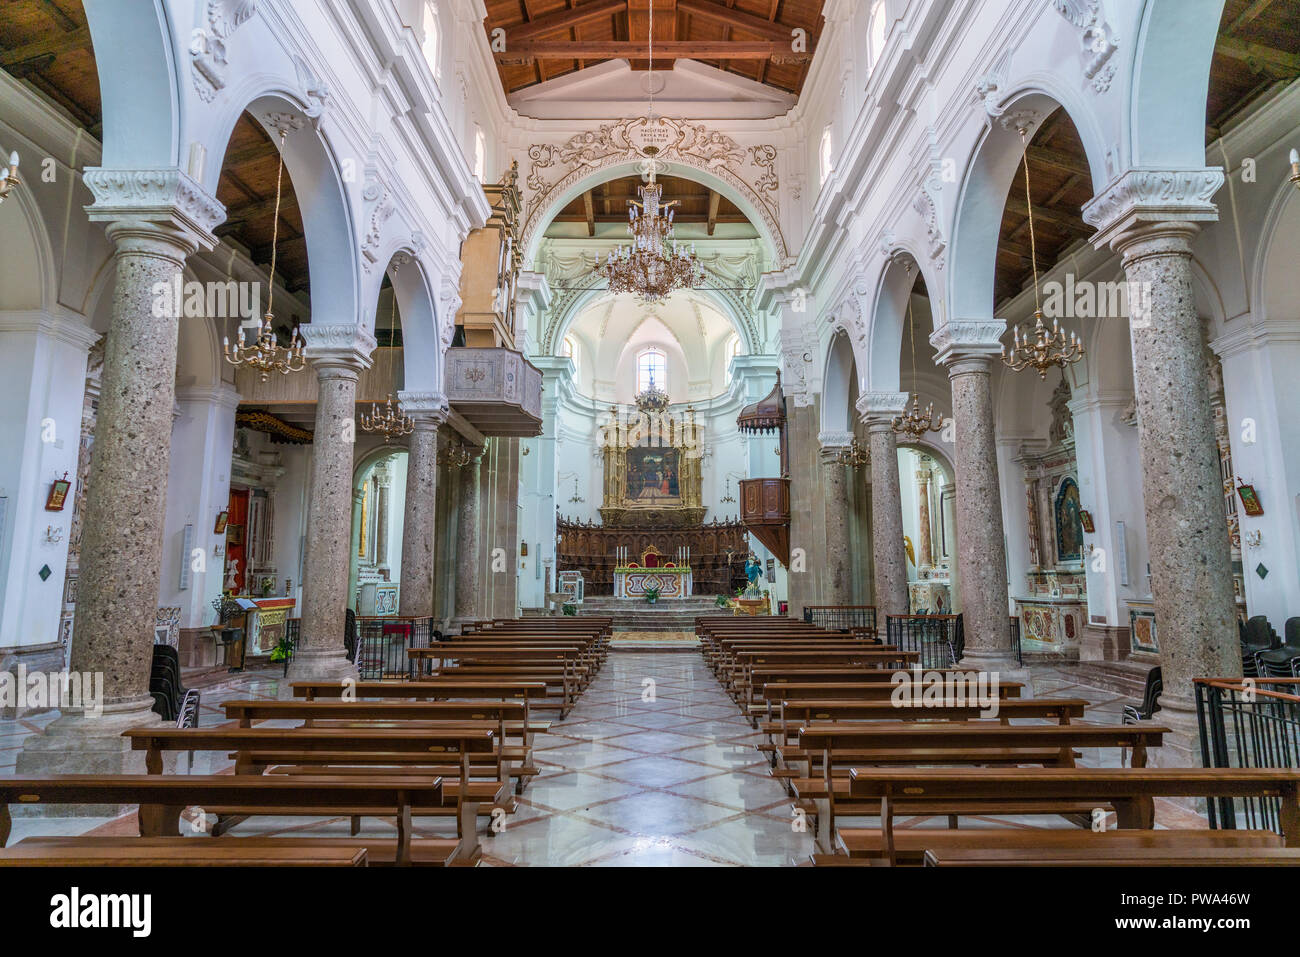 Indoor Anblick in Forza D'Agrò Kathedrale, Provinz Messina, Sizilien, Süditalien. Stockfoto